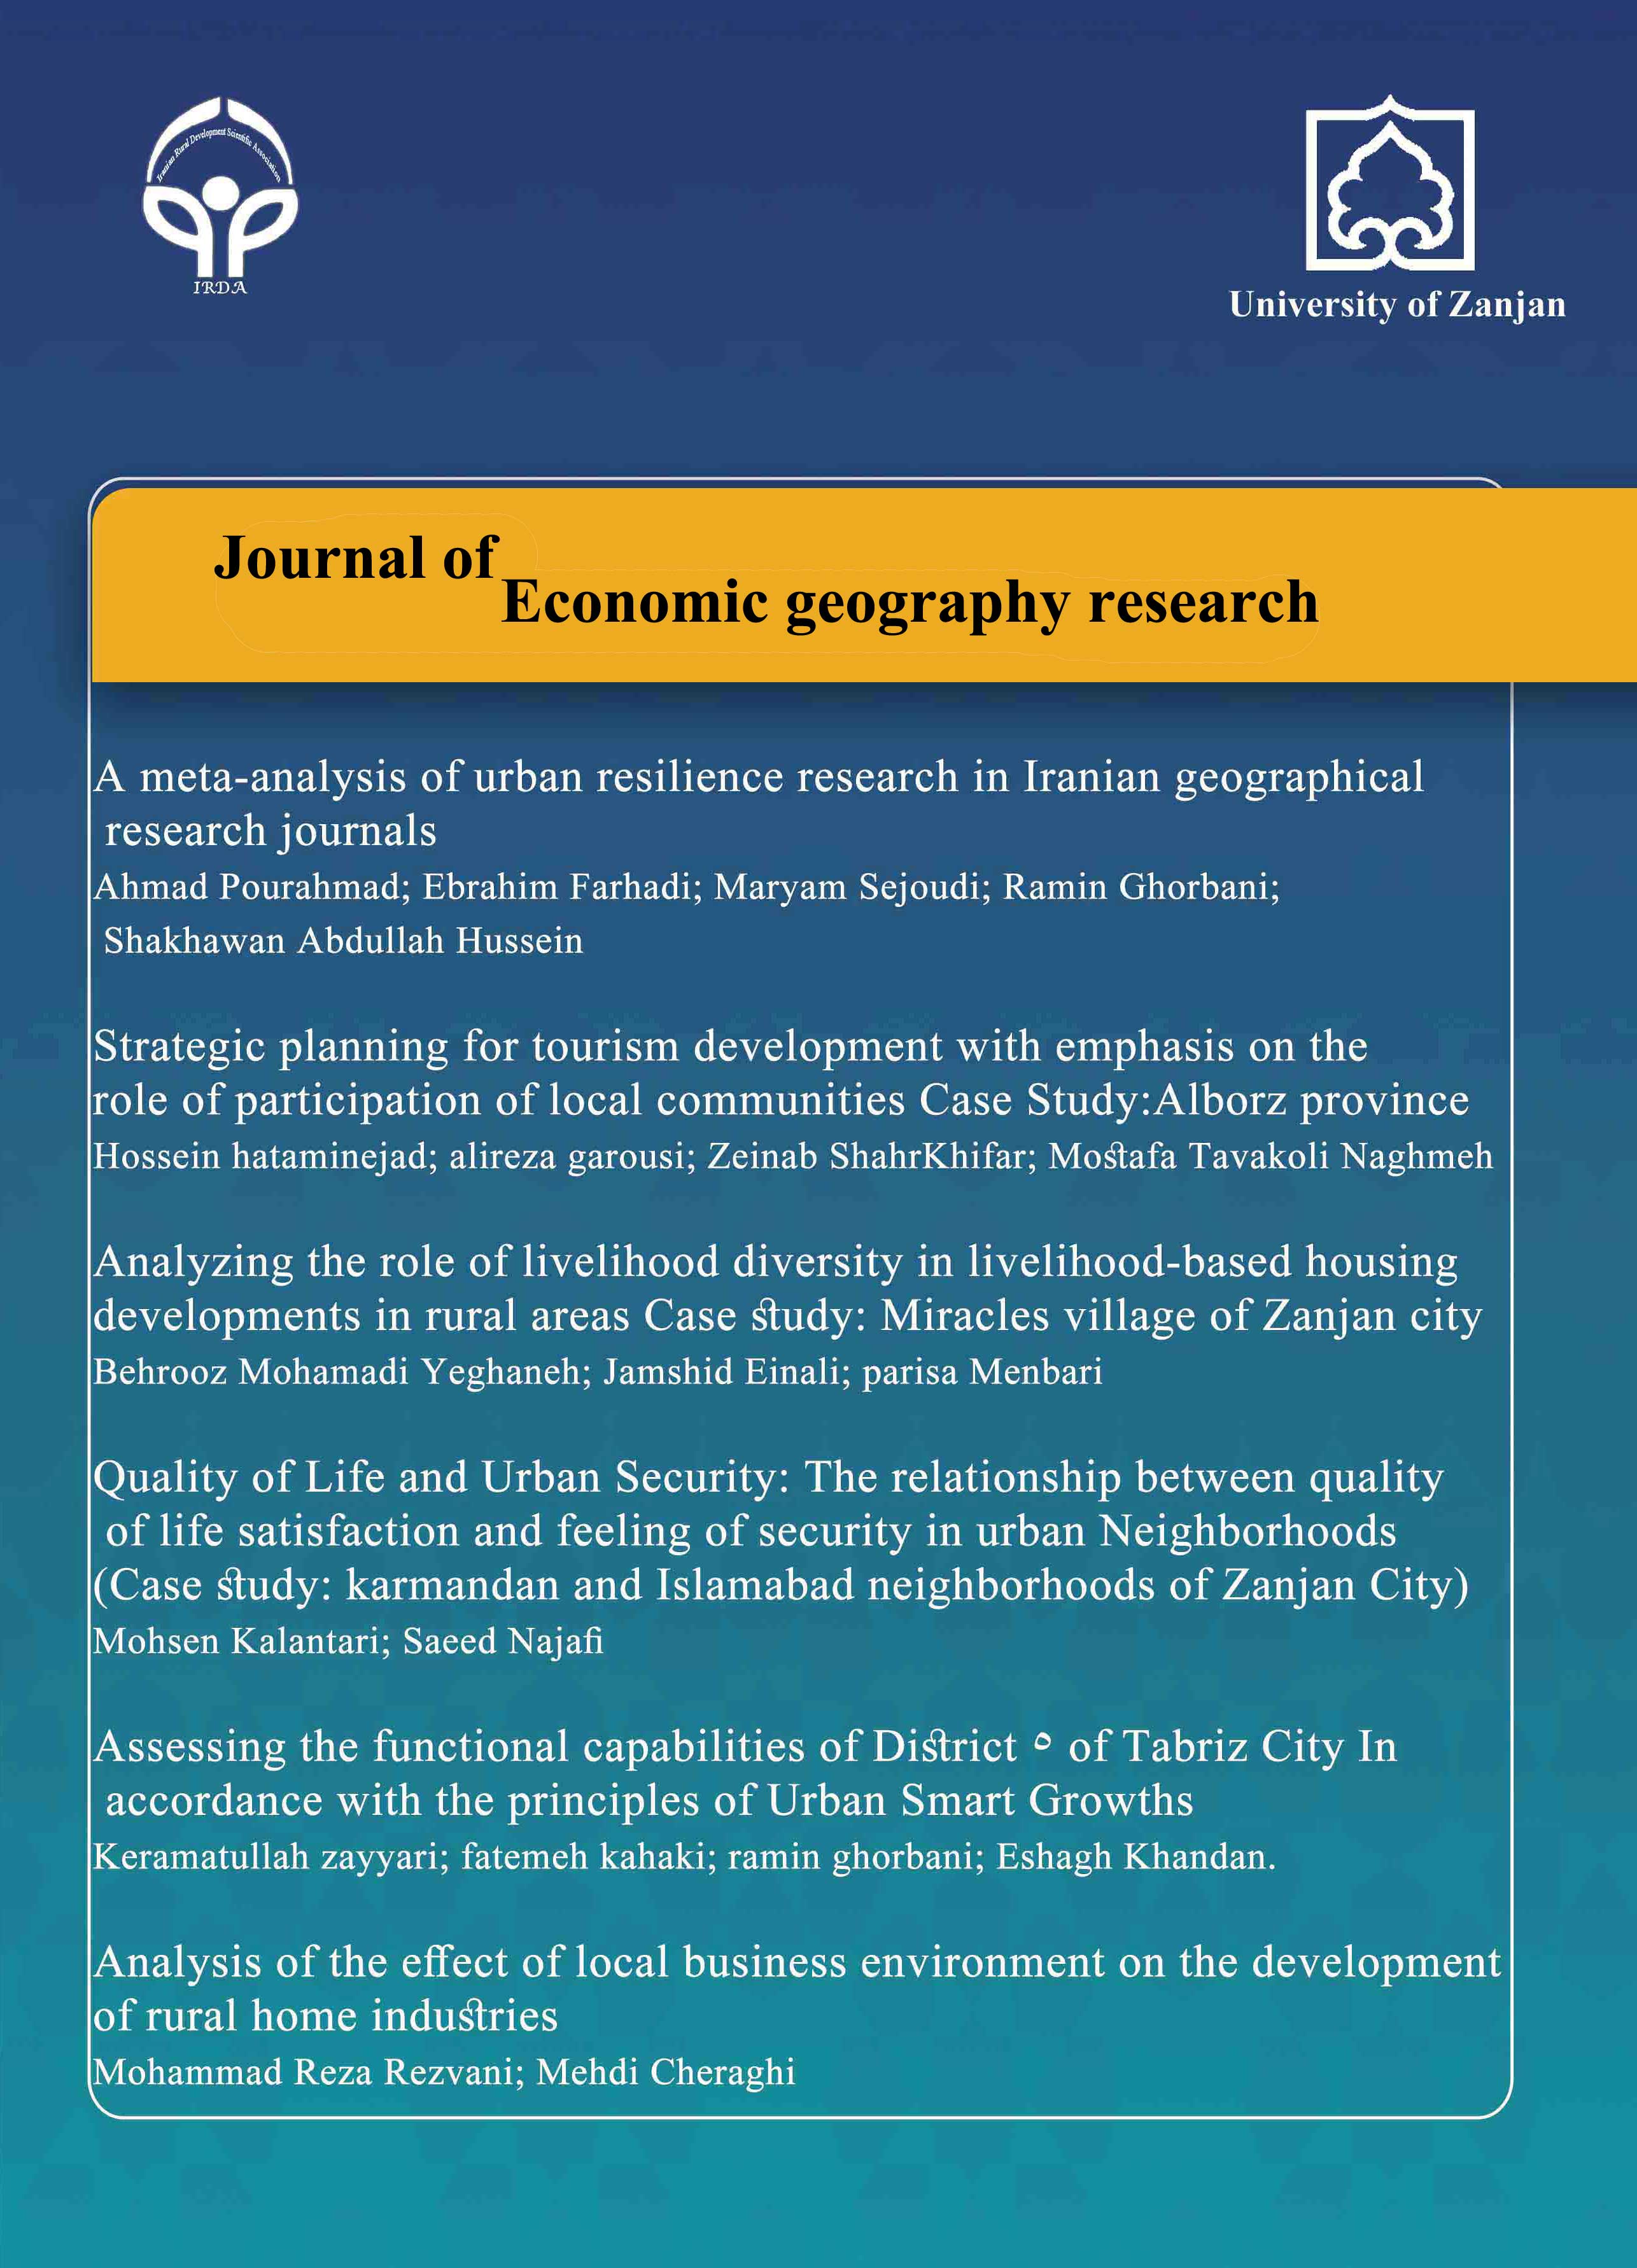 Journal of Economic Geography Research